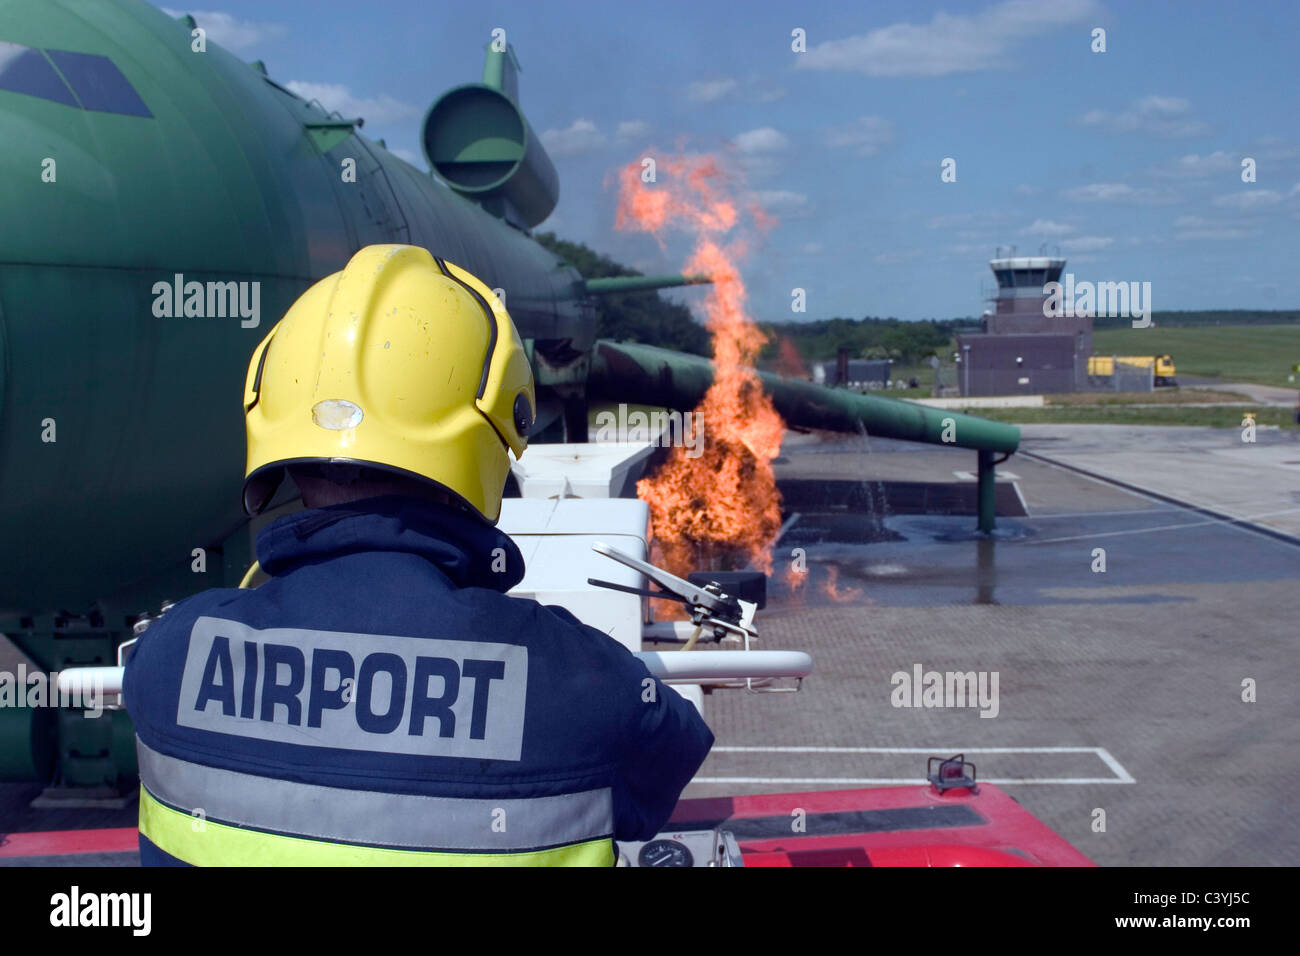 Firefighters tackle simulated aircraft engine fire Stock Photo